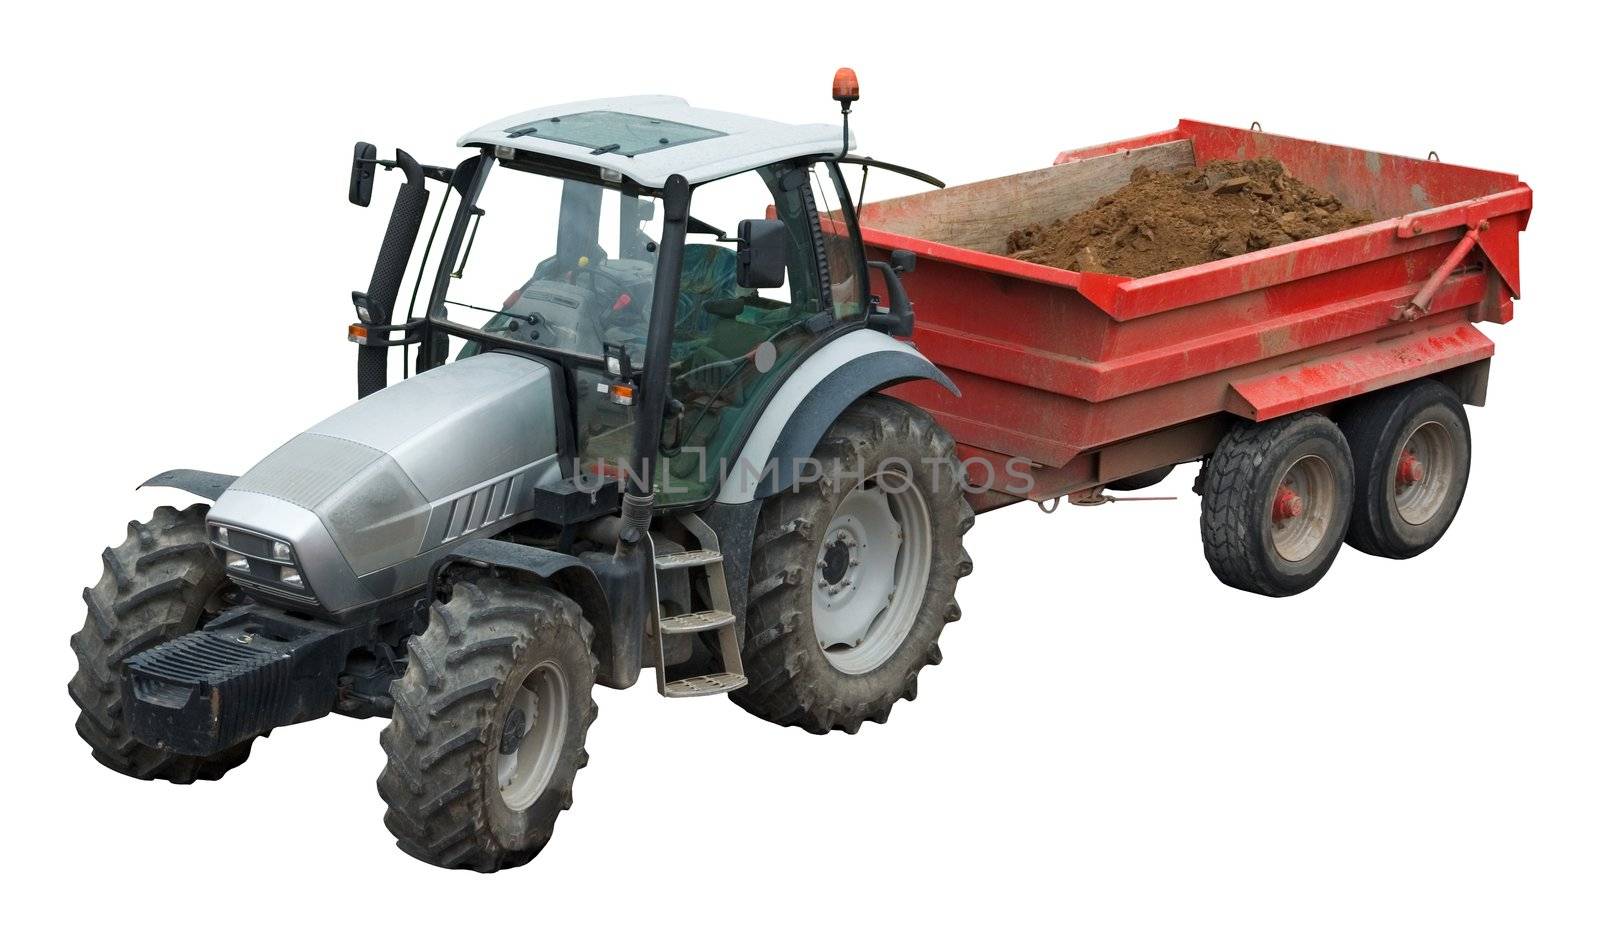 Heavy tractor pulling a trailer of dirt from a construction site (isolation on white with clipping path)